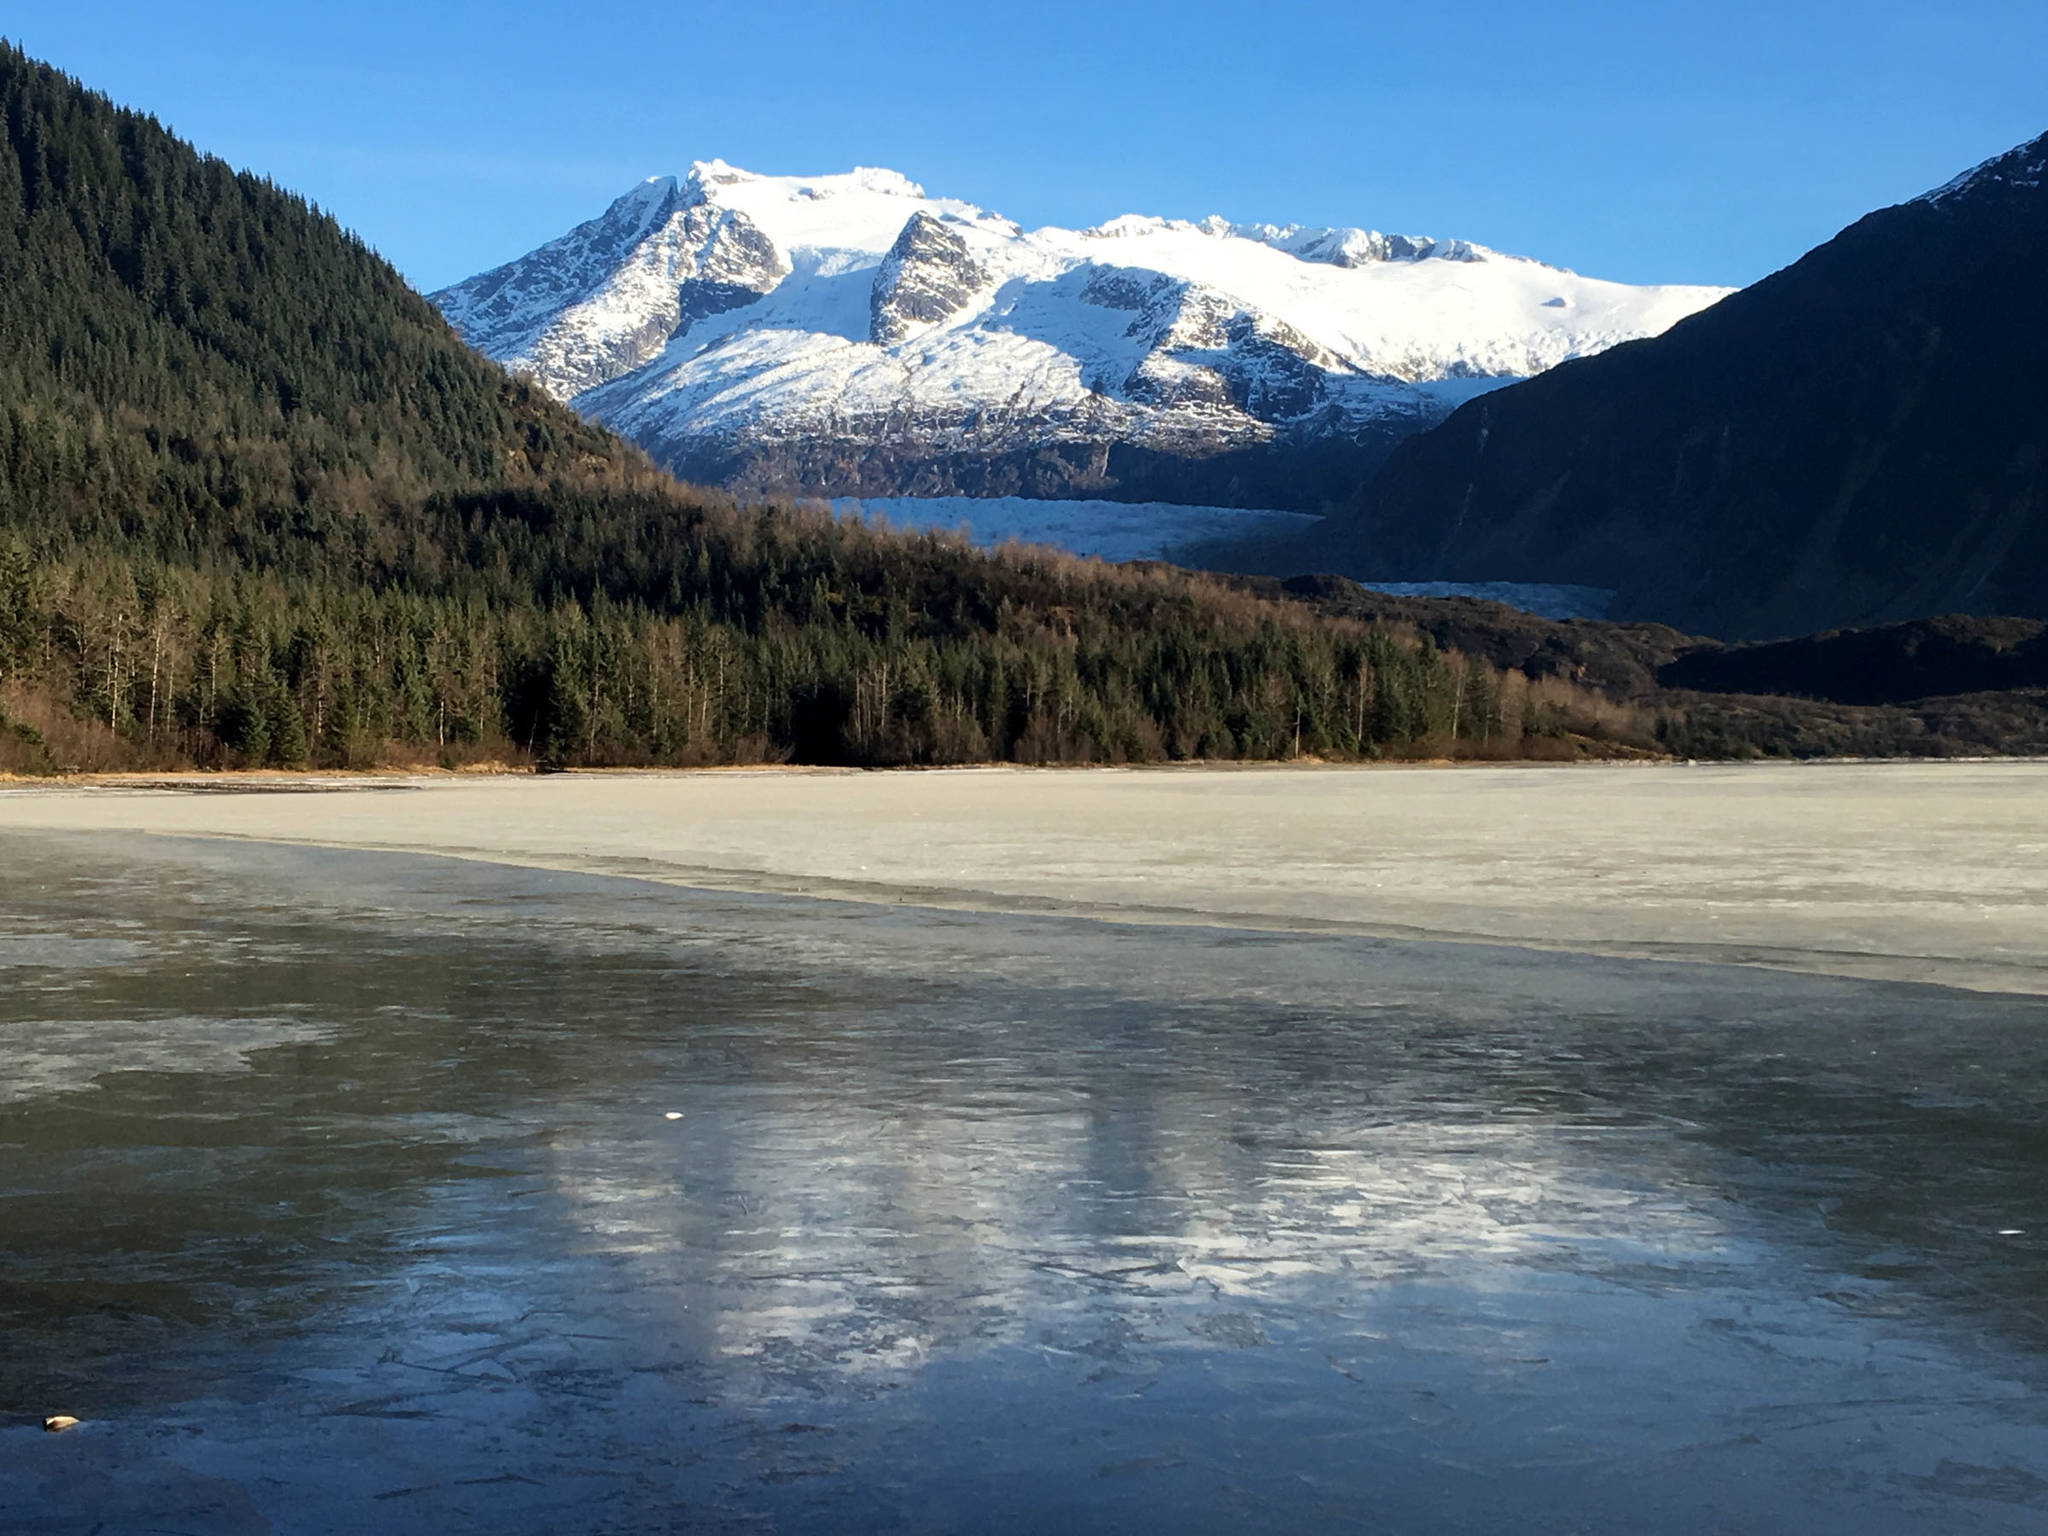 Mendenhall Glacier reflects in the thin ice of Mendenhall Lake. (Photo by Denise Carroll)